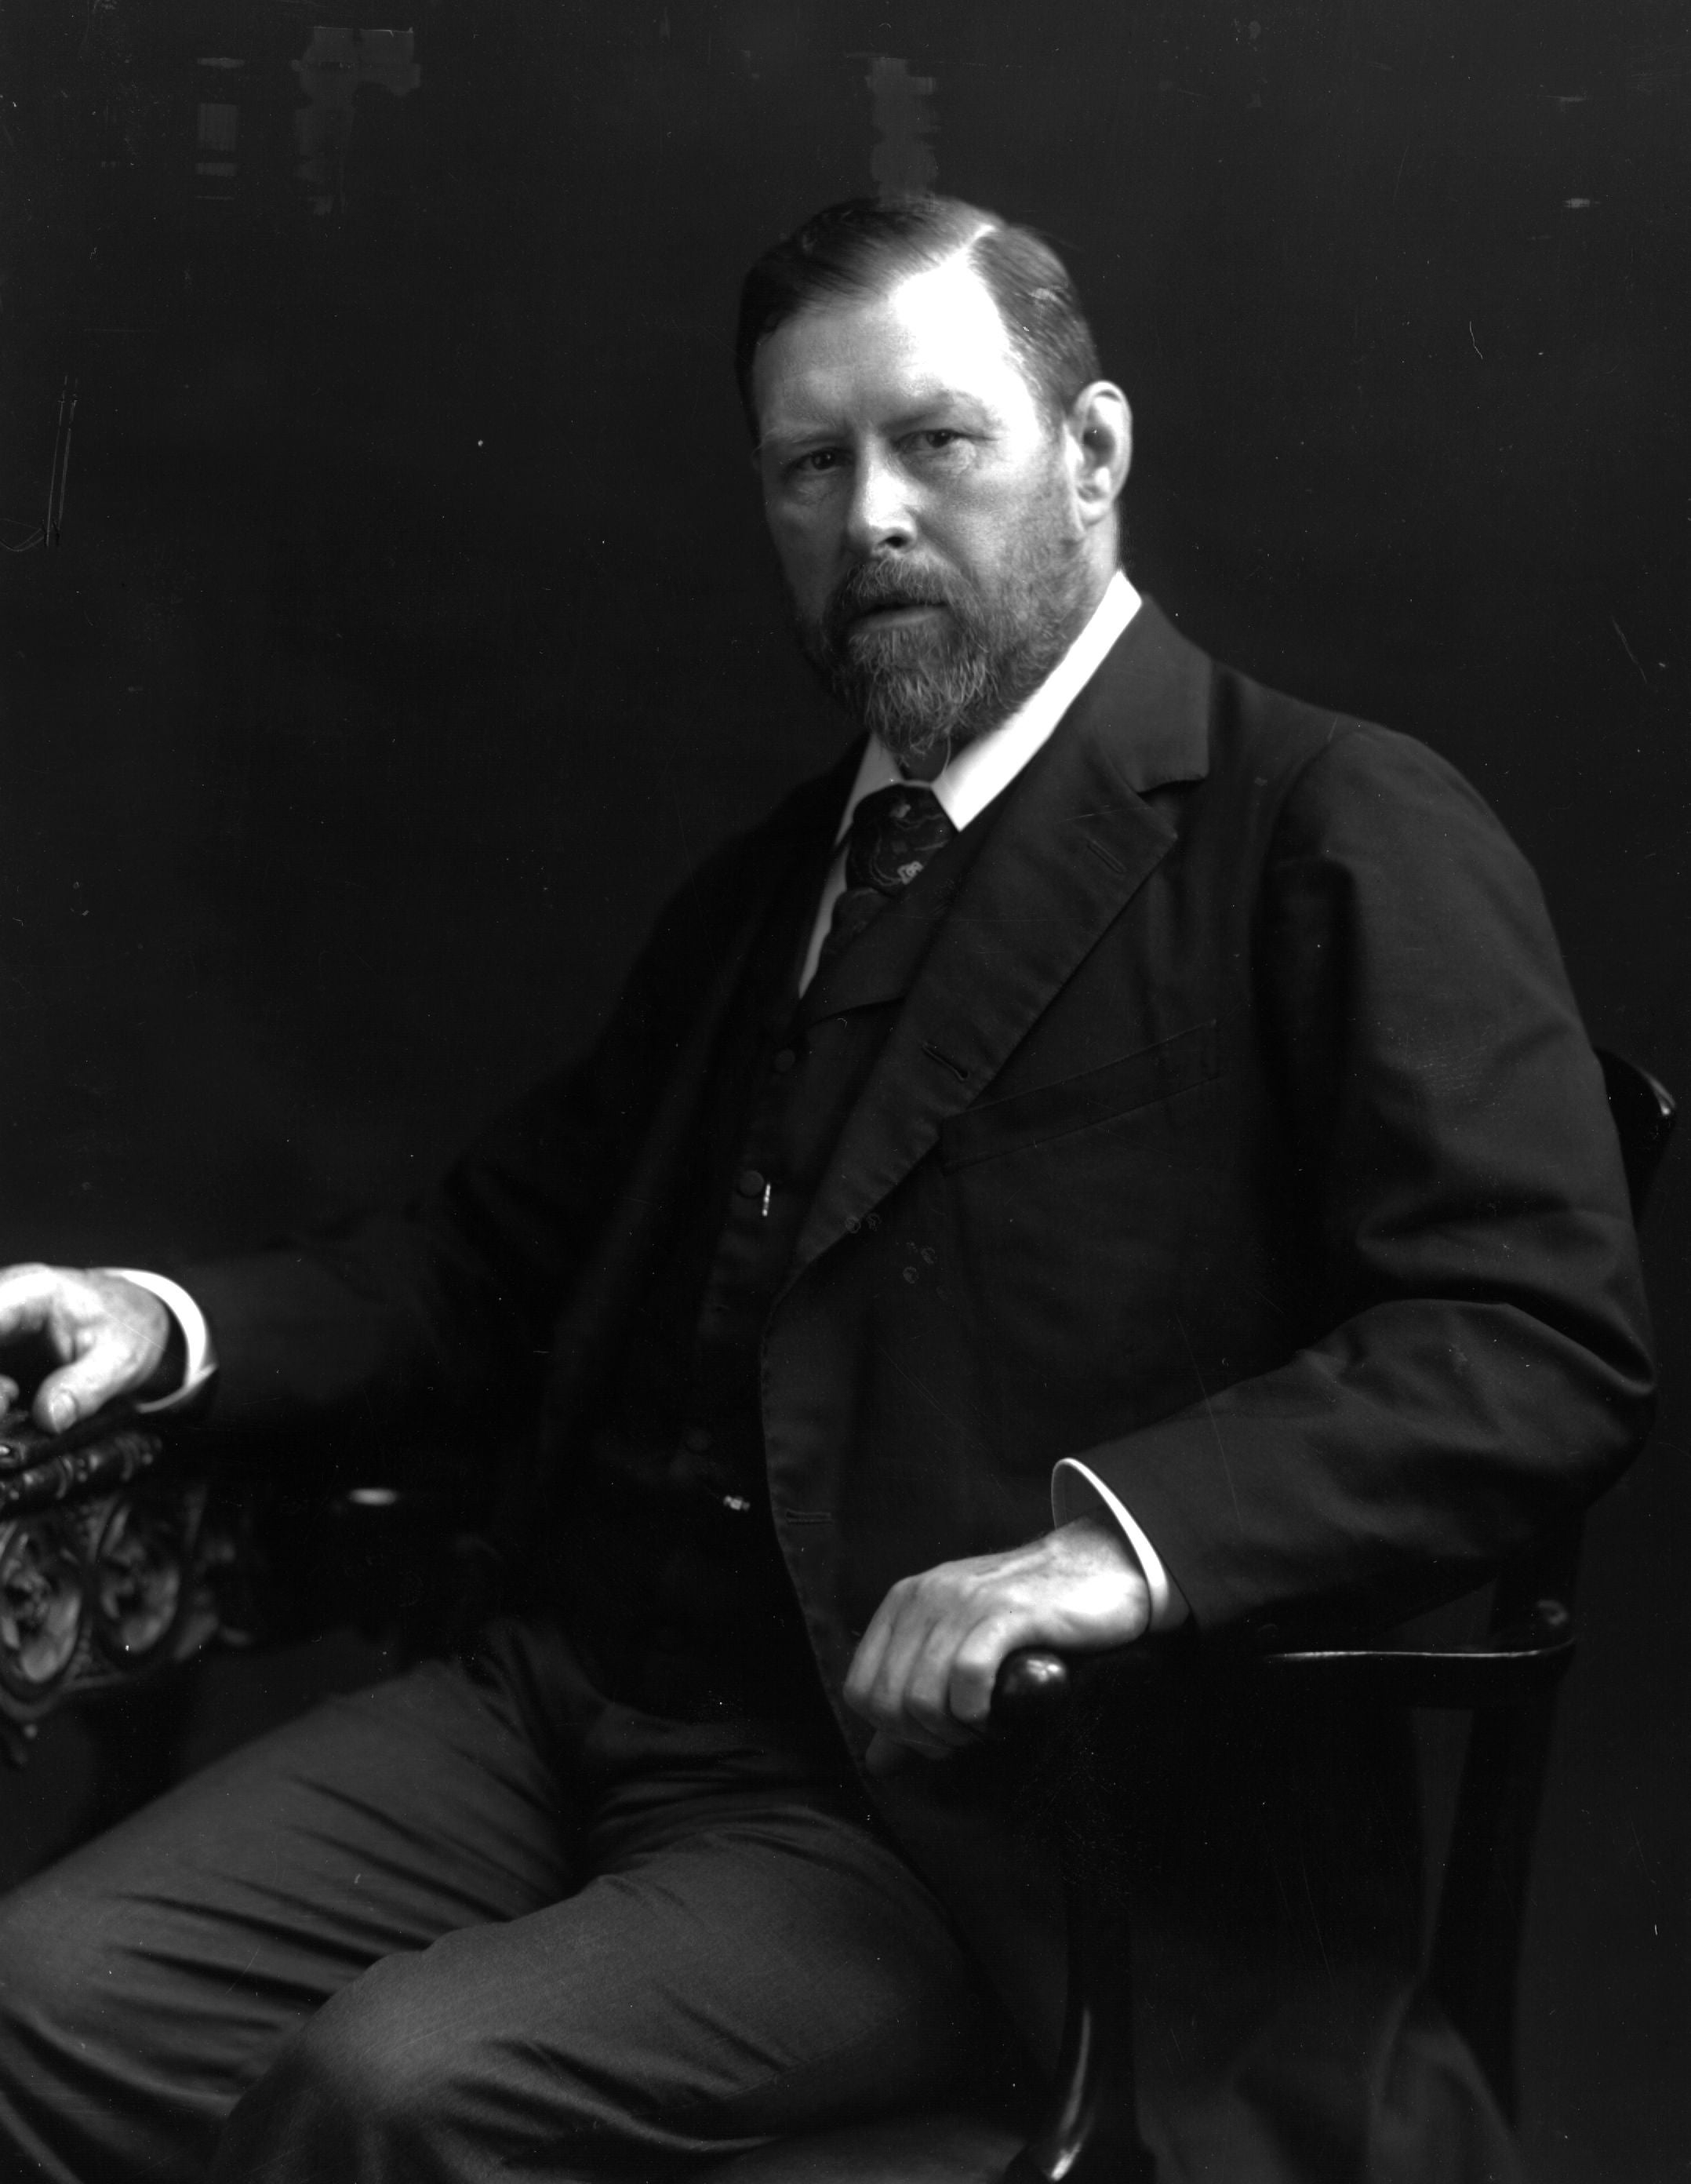 Bram Stoker was born in Dublin and published ‘Dracula’ on 26 May 1897